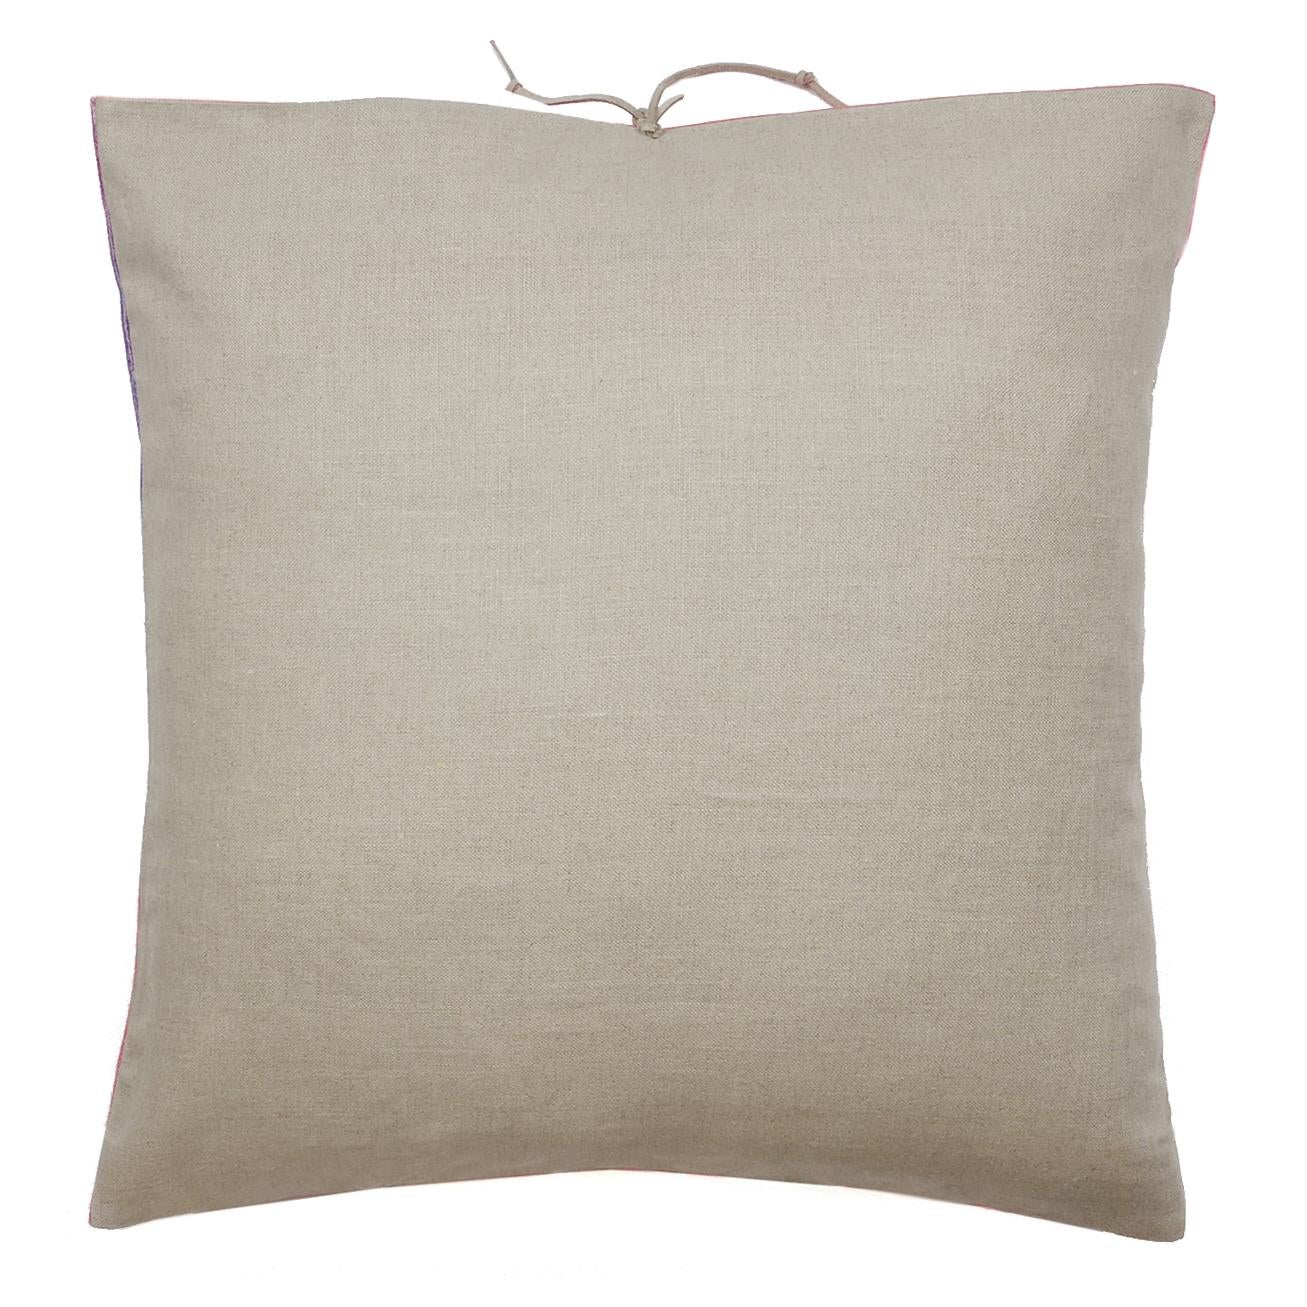 American Printed Linen Pillow Cloudy Sunshine For Sale